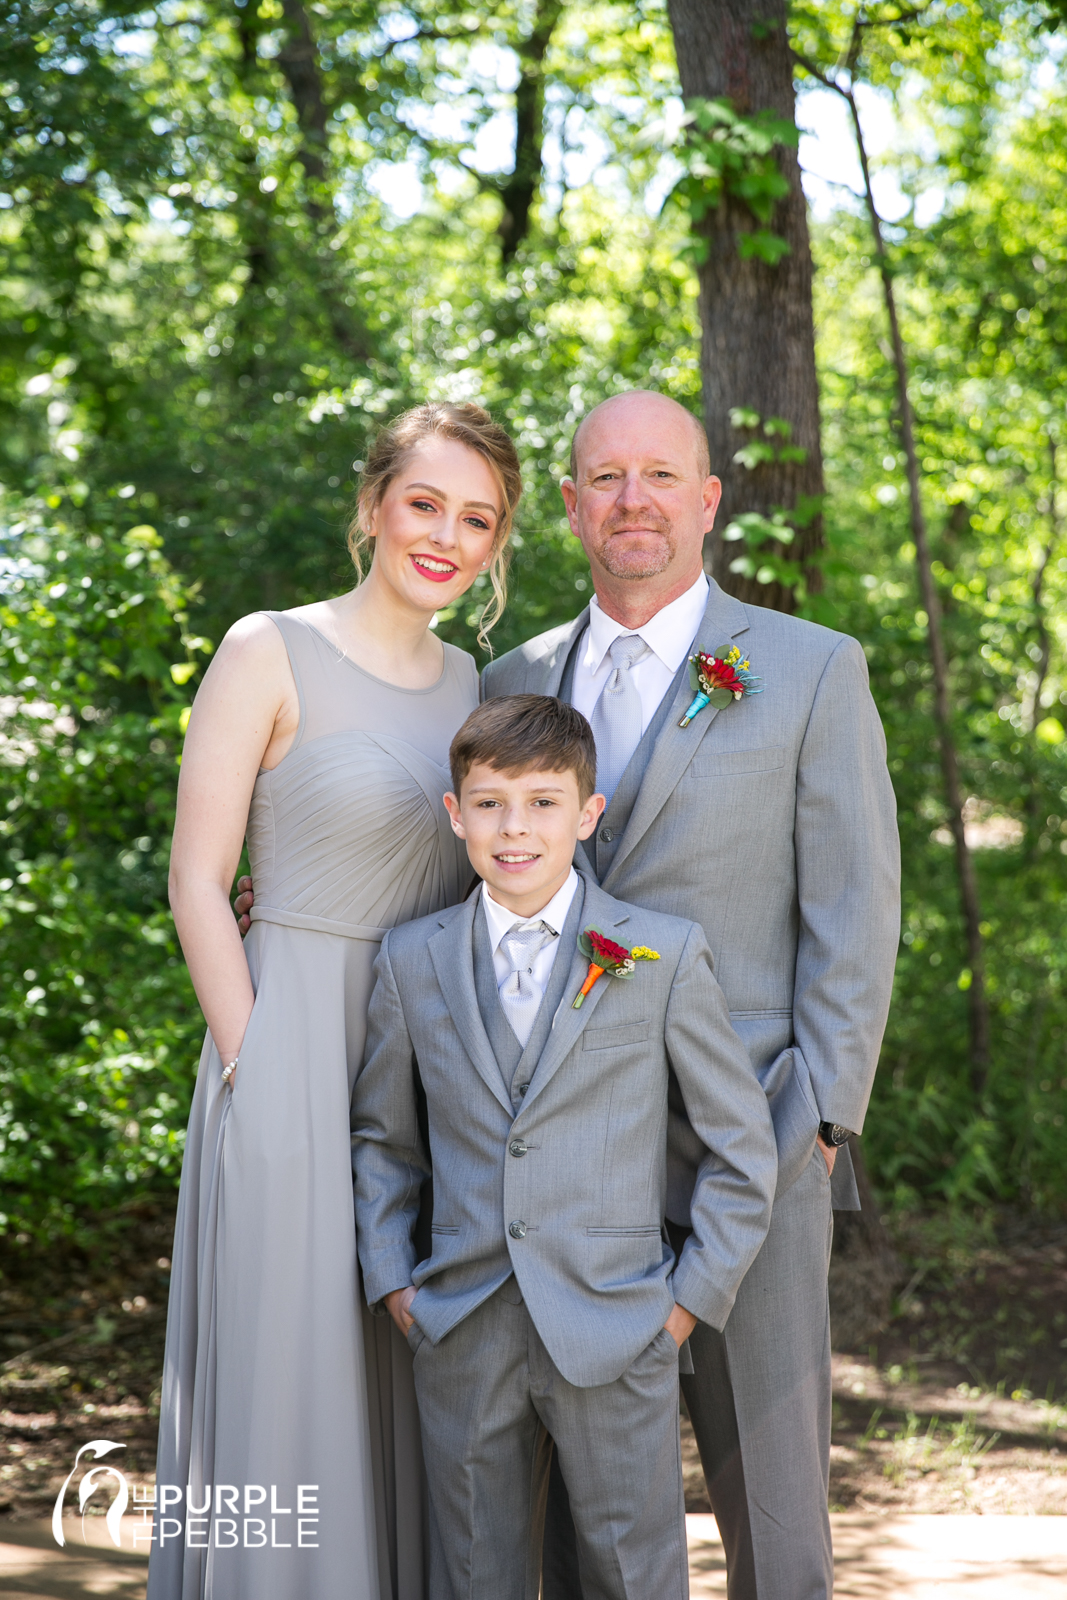 Groom and His Kids